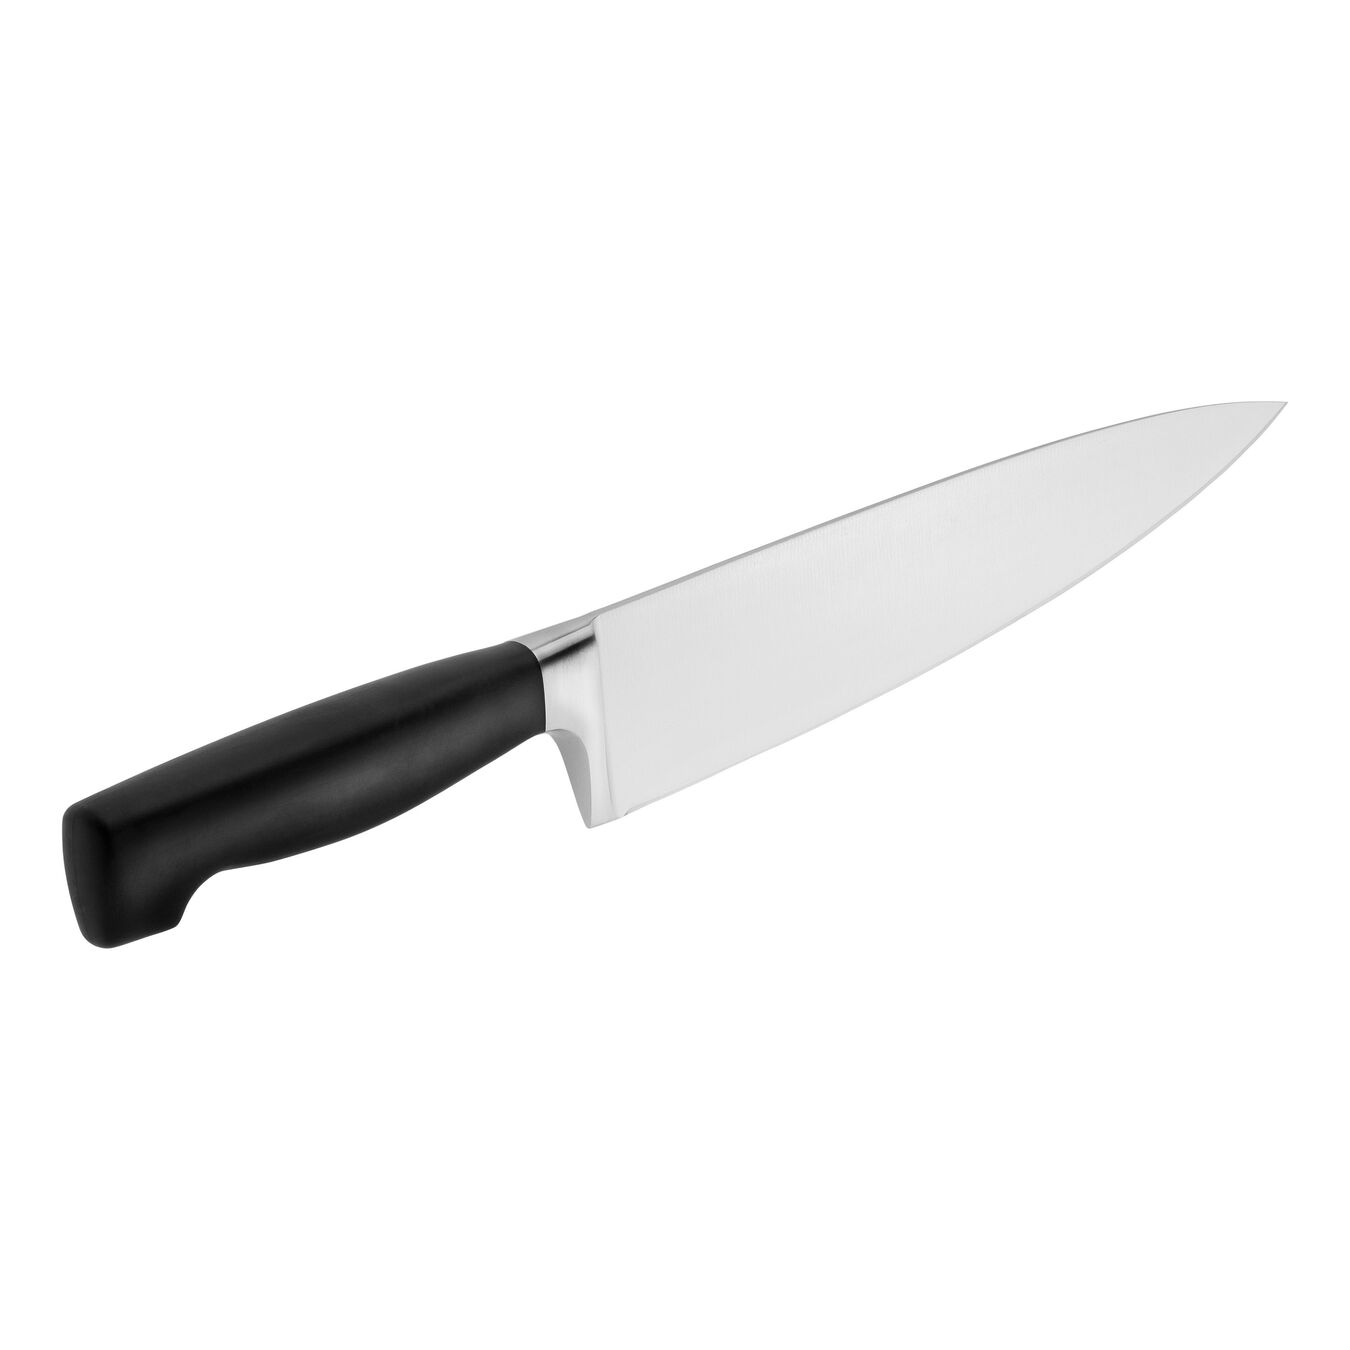 6.5 inch Chef's knife - Visual Imperfections,,large 2